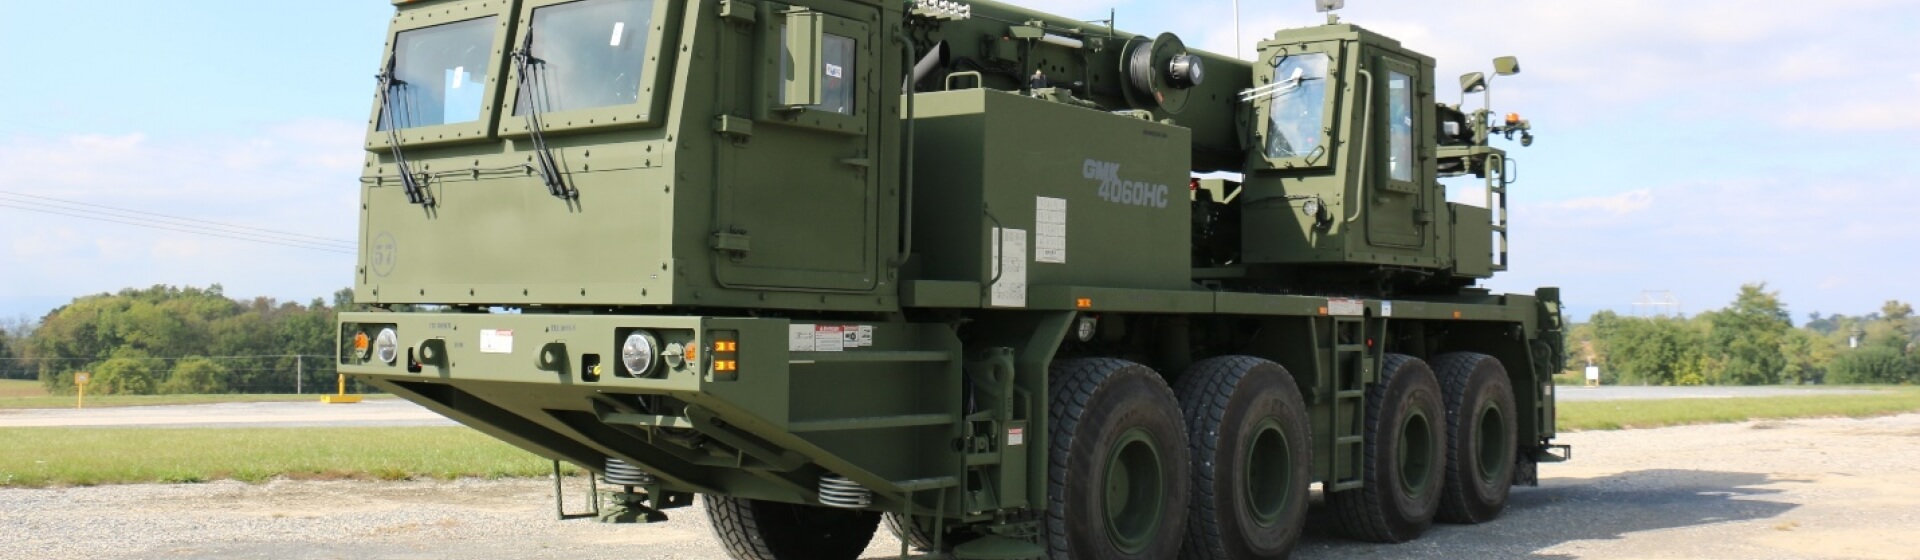 Manitowoc-starts-deliveries-of-Grove-GMK4060HC-all-terrain-cranes-to-the-Army-03.jpg